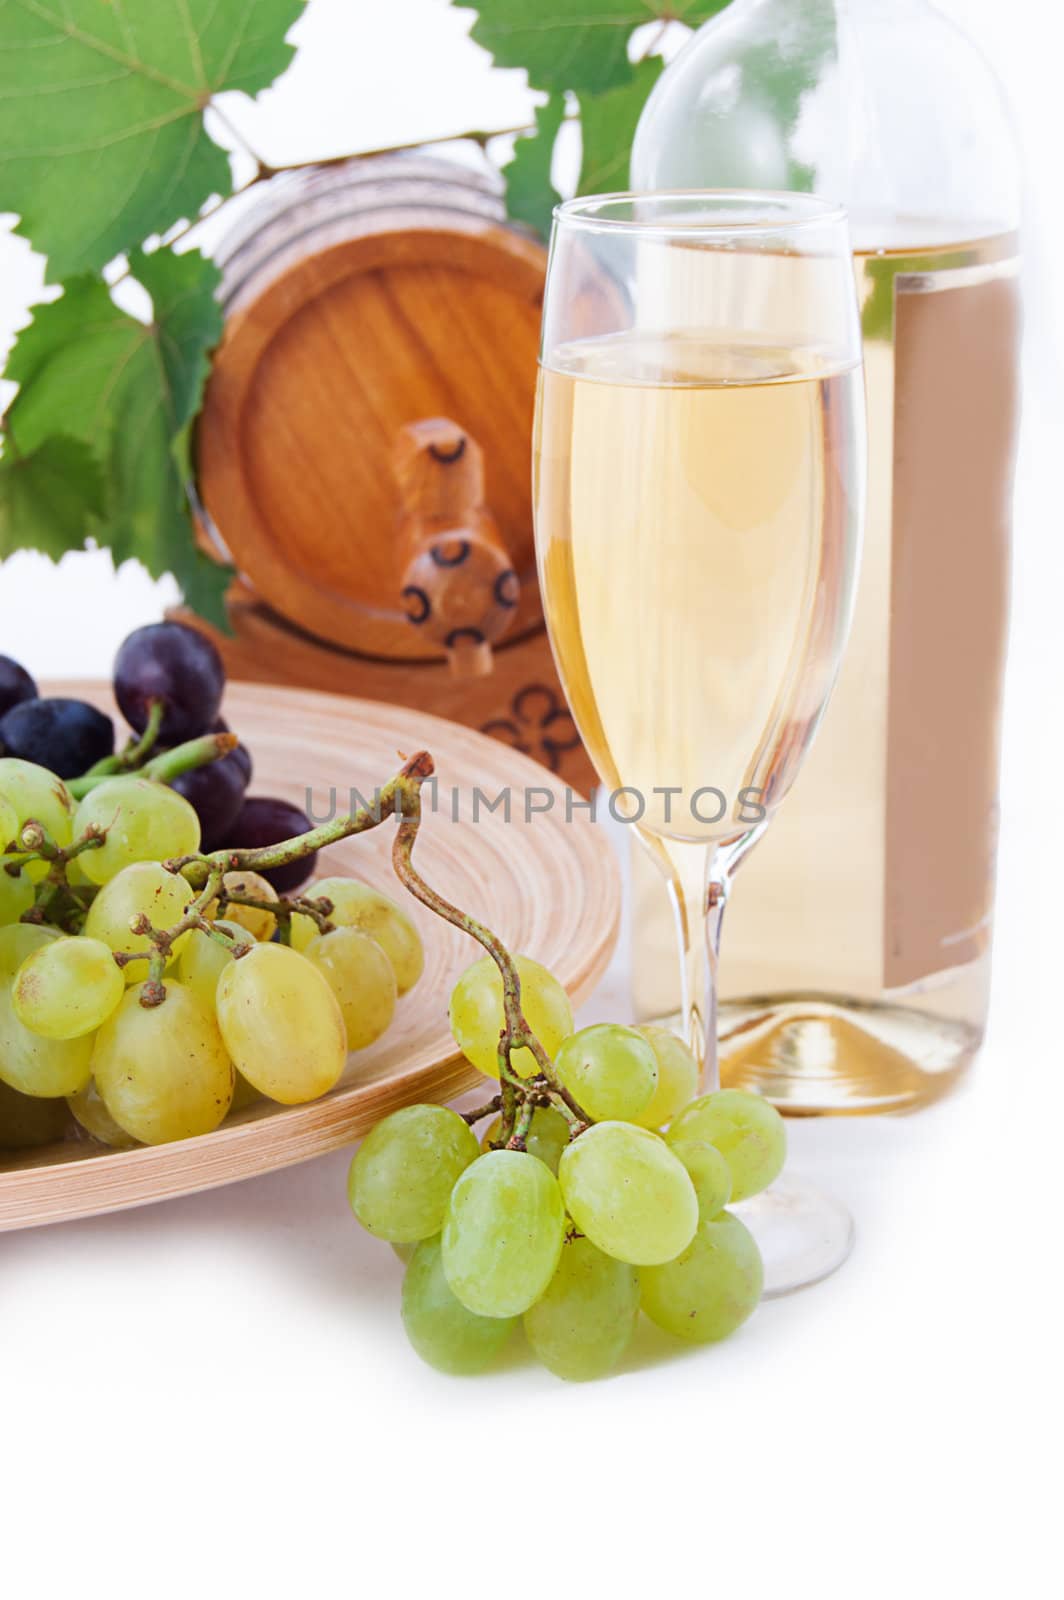 White wine bottle, glass and cask with grapes over white